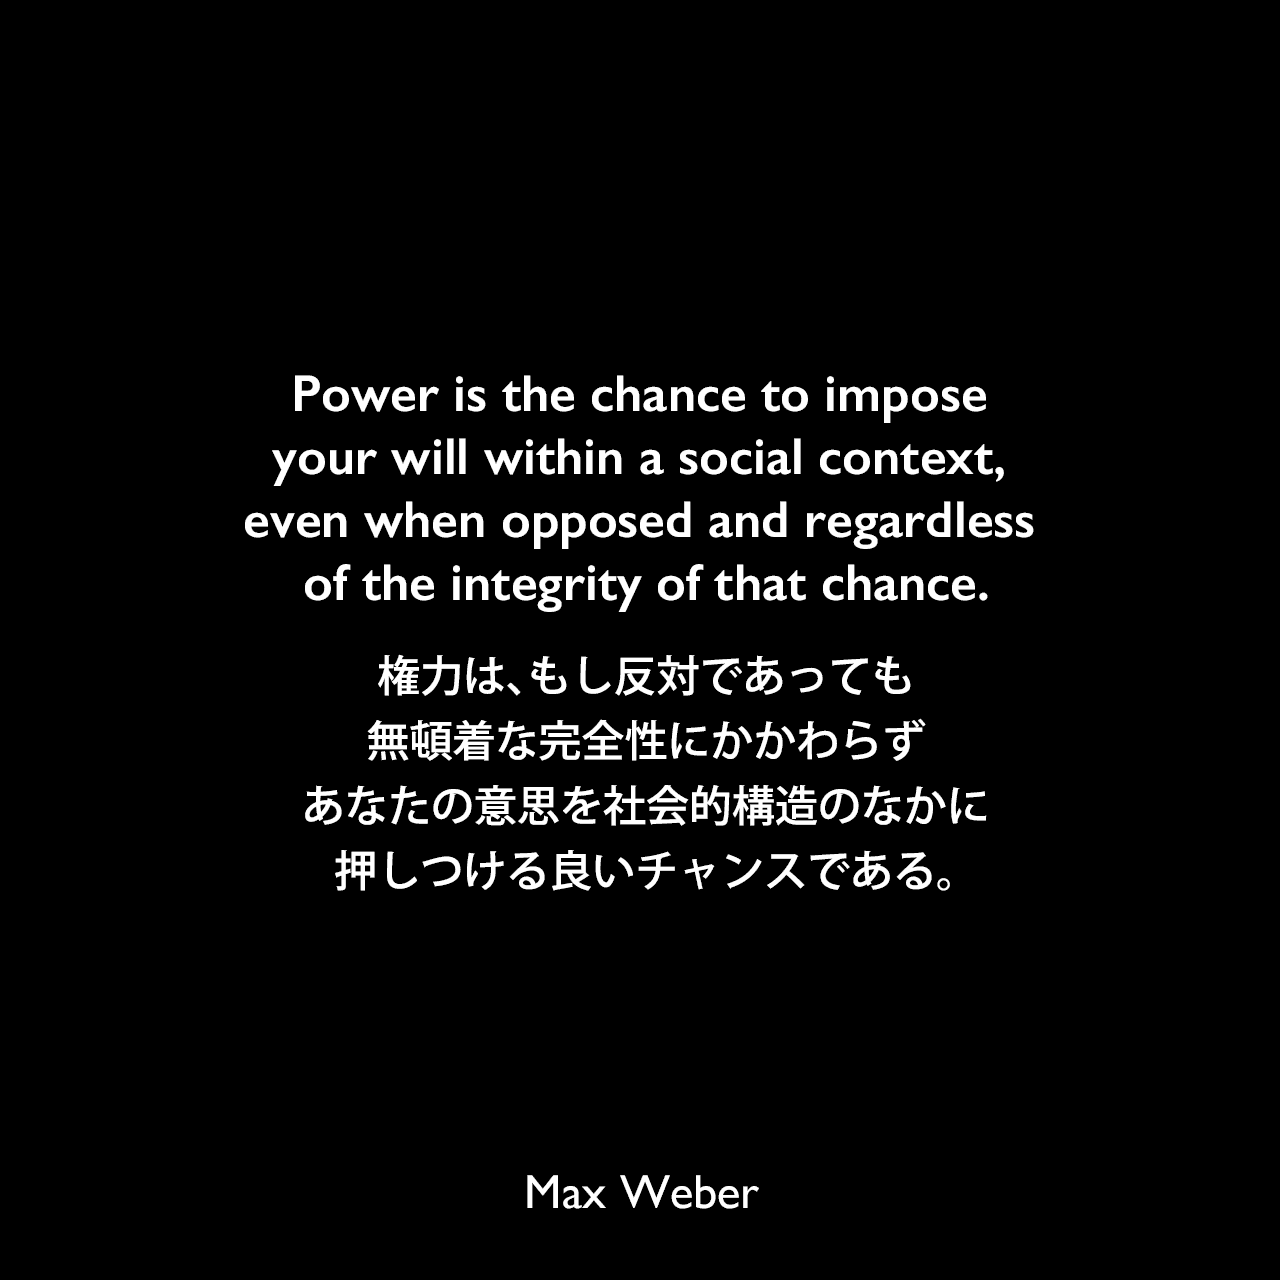 Power is the chance to impose your will within a social context, even when opposed and regardless of the integrity of that chance.権力は、もし反対であっても、無頓着な完全性にかかわらず、あなたの意思を社会的構造のなかに押しつける良いチャンスである。Max Weber